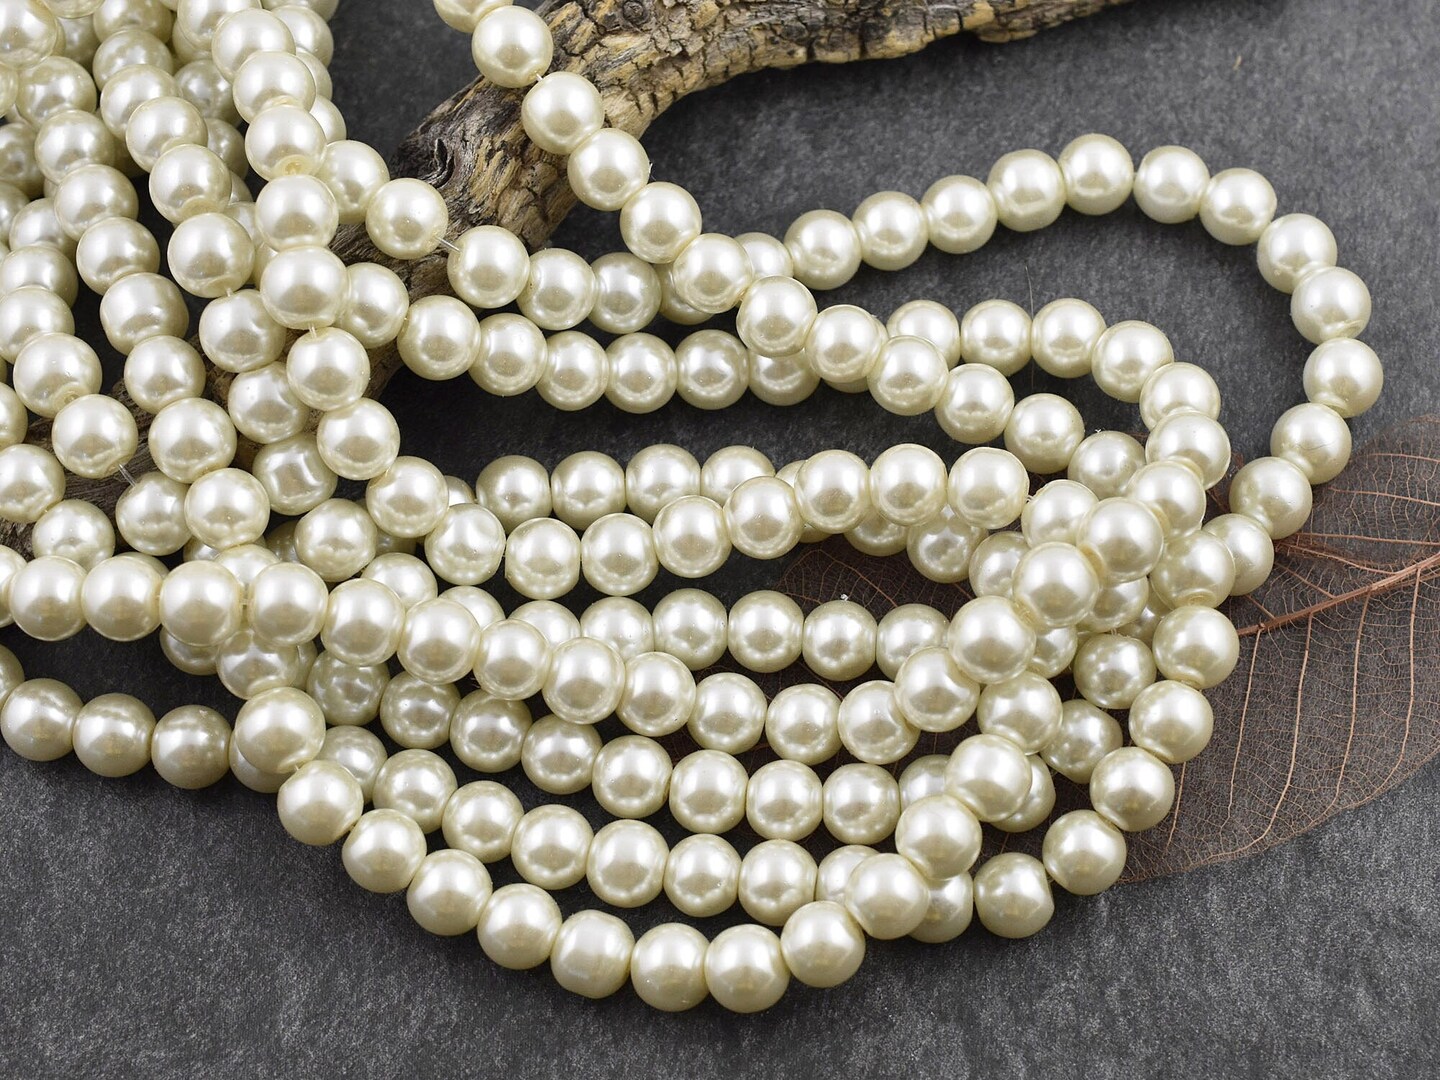 Creamy White Pearl Round Beads (32 inch strand) -- Choose Your Size